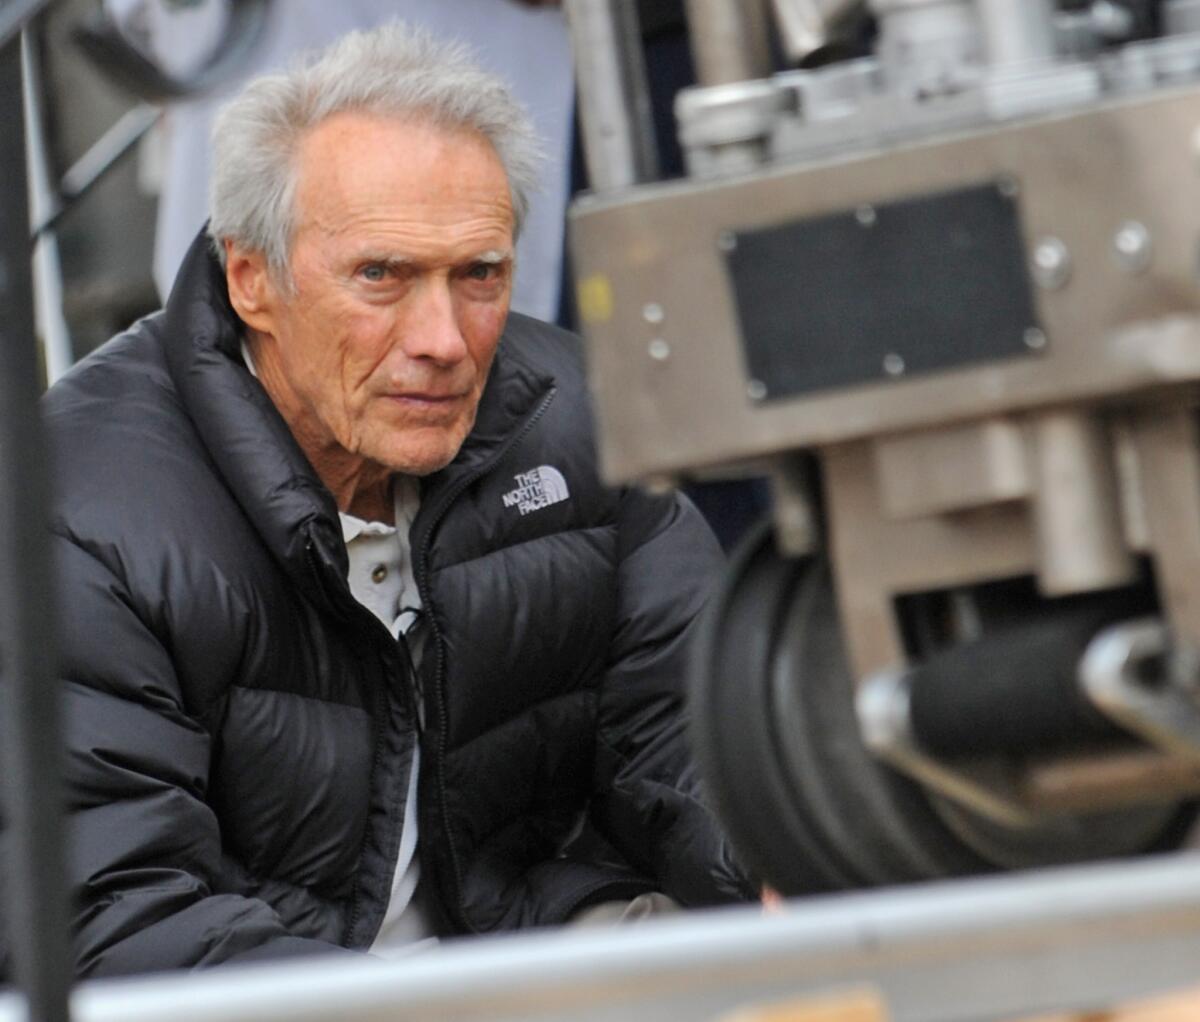 Clint Eastwood on the set of "Jersey Boys."